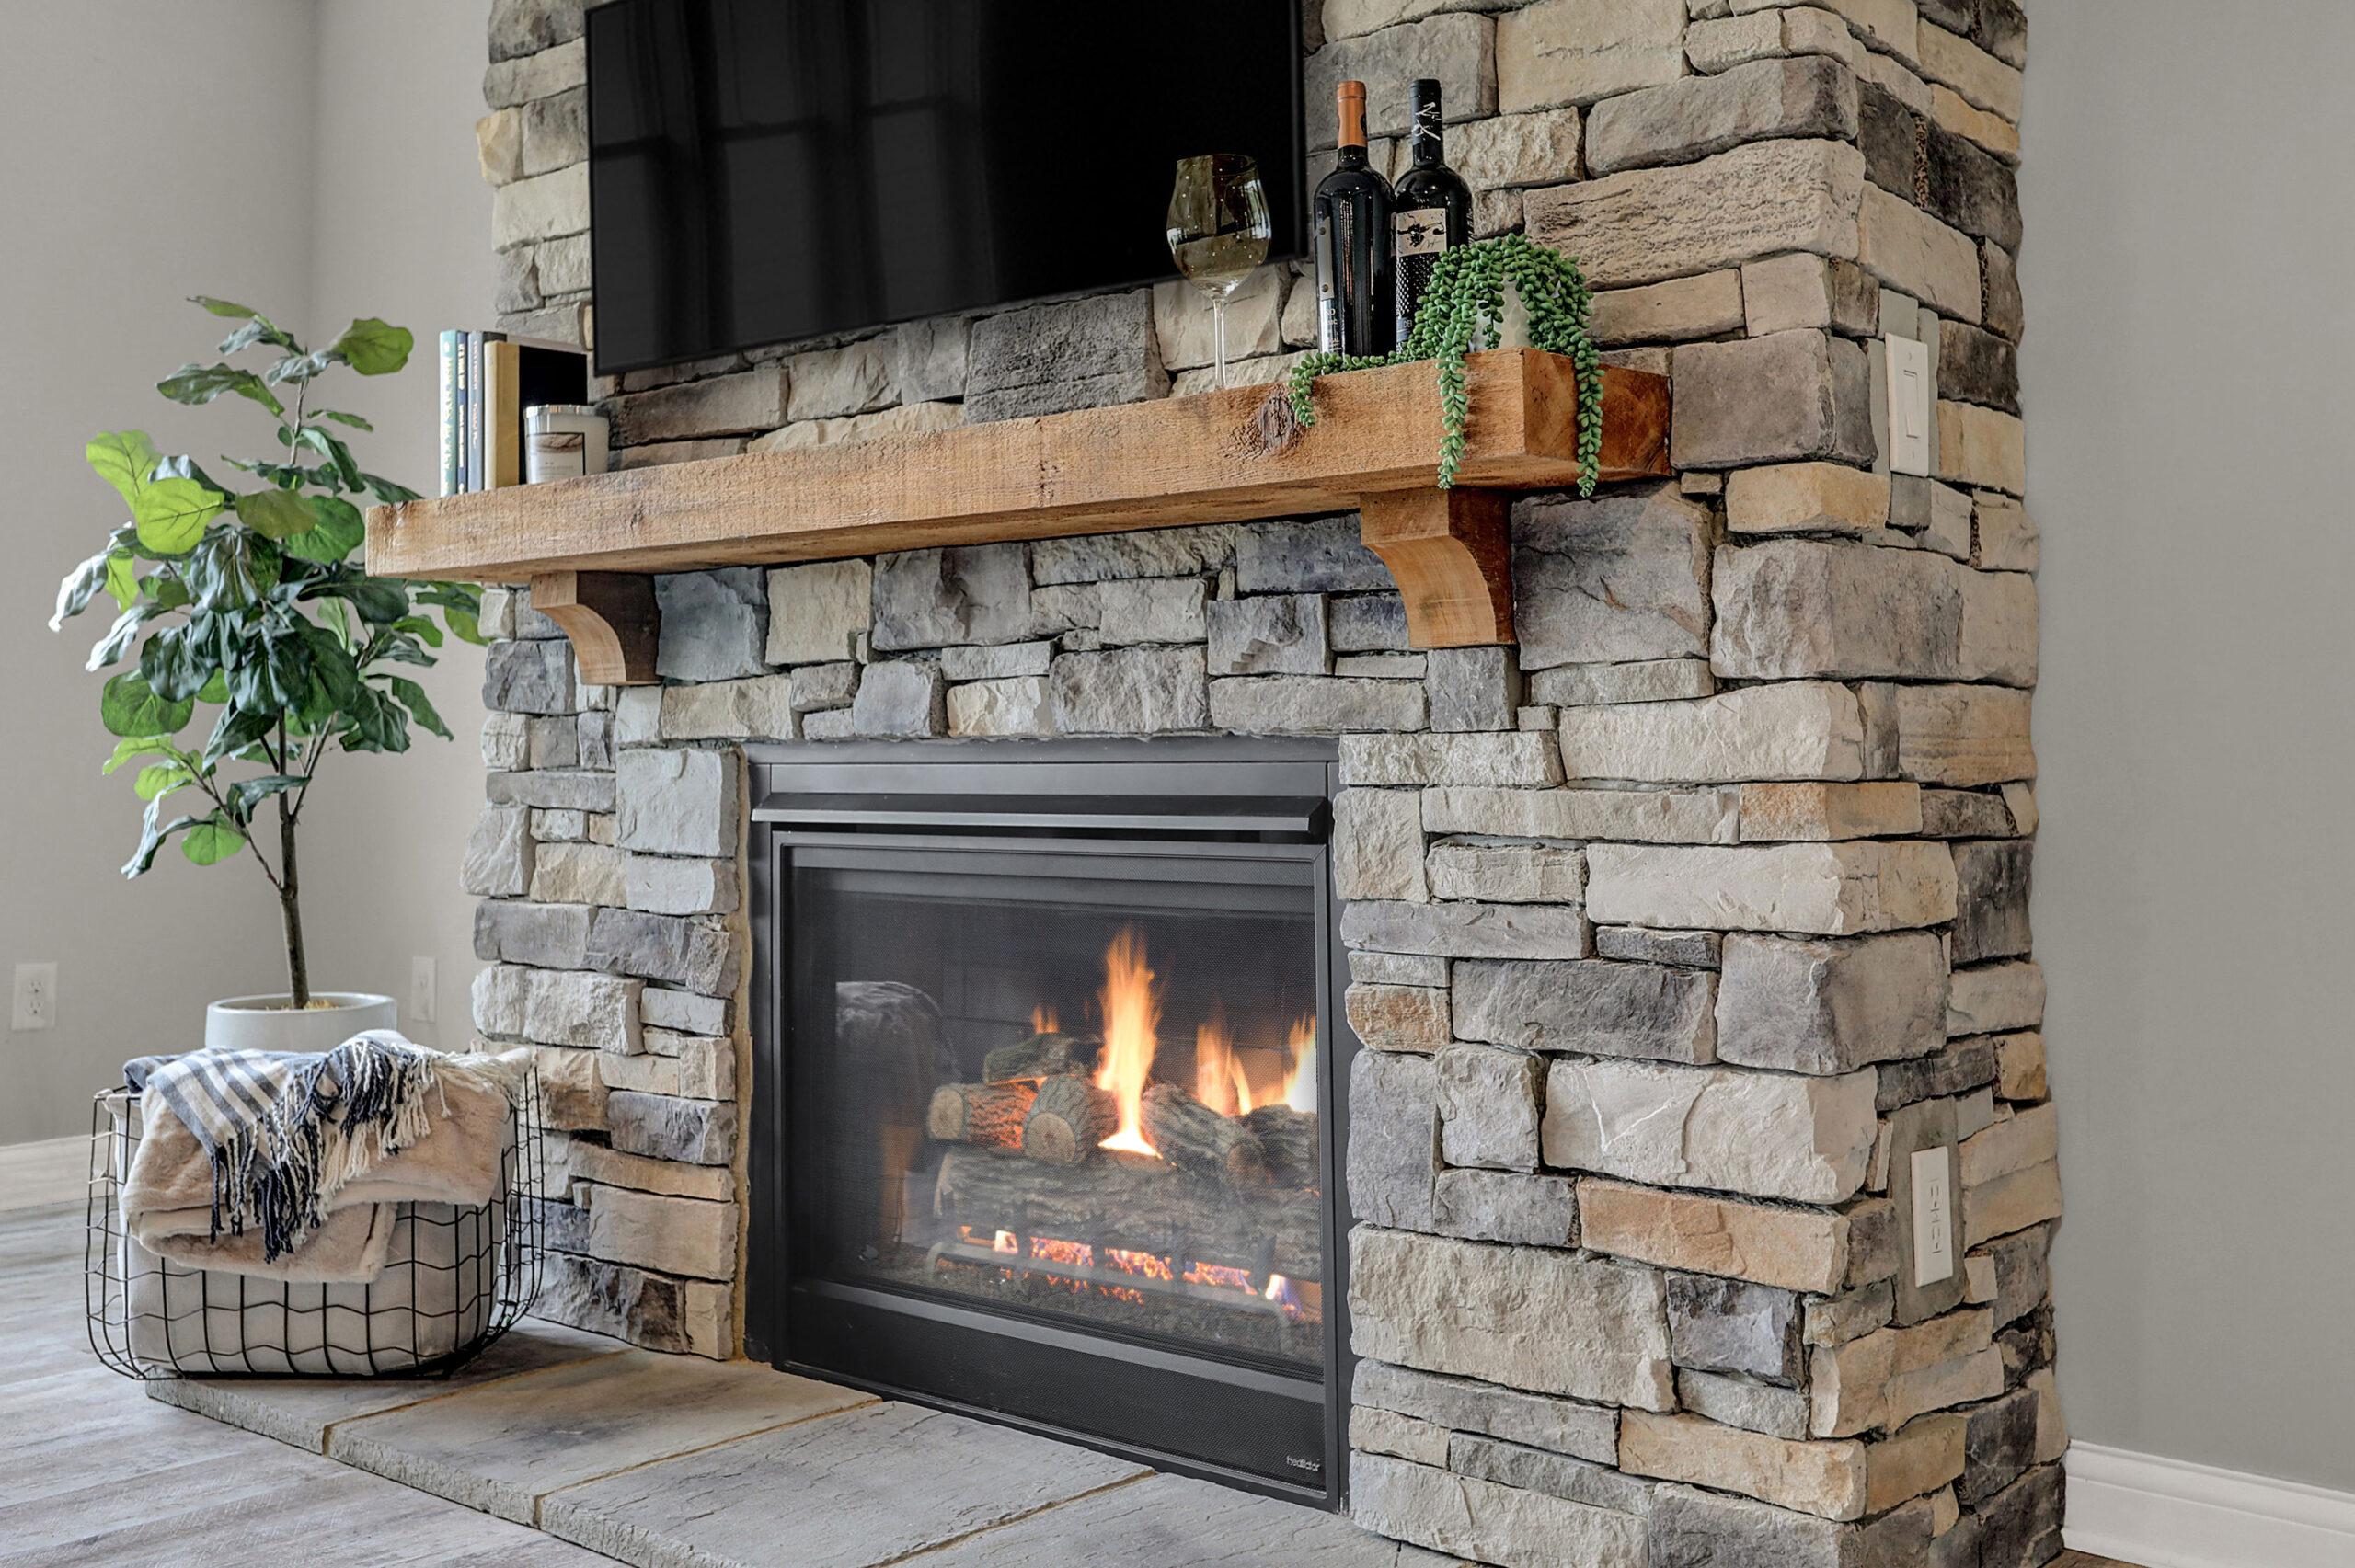 Gas Fireplace Design and Construction